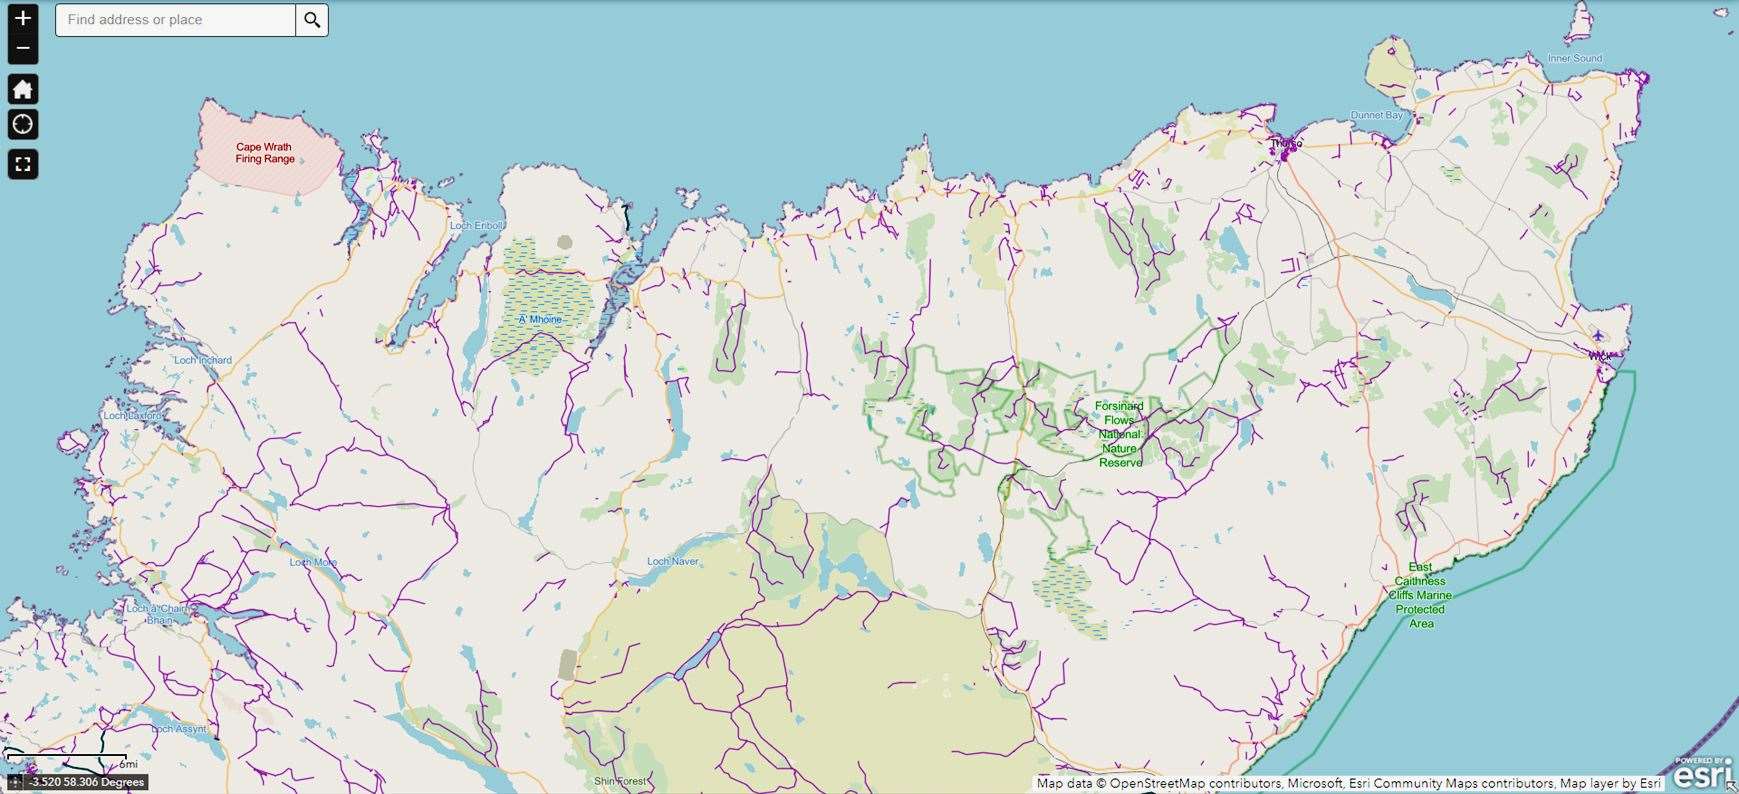 A section of the Scottish Paths Map showing routes in Caithness and north Sutherland.